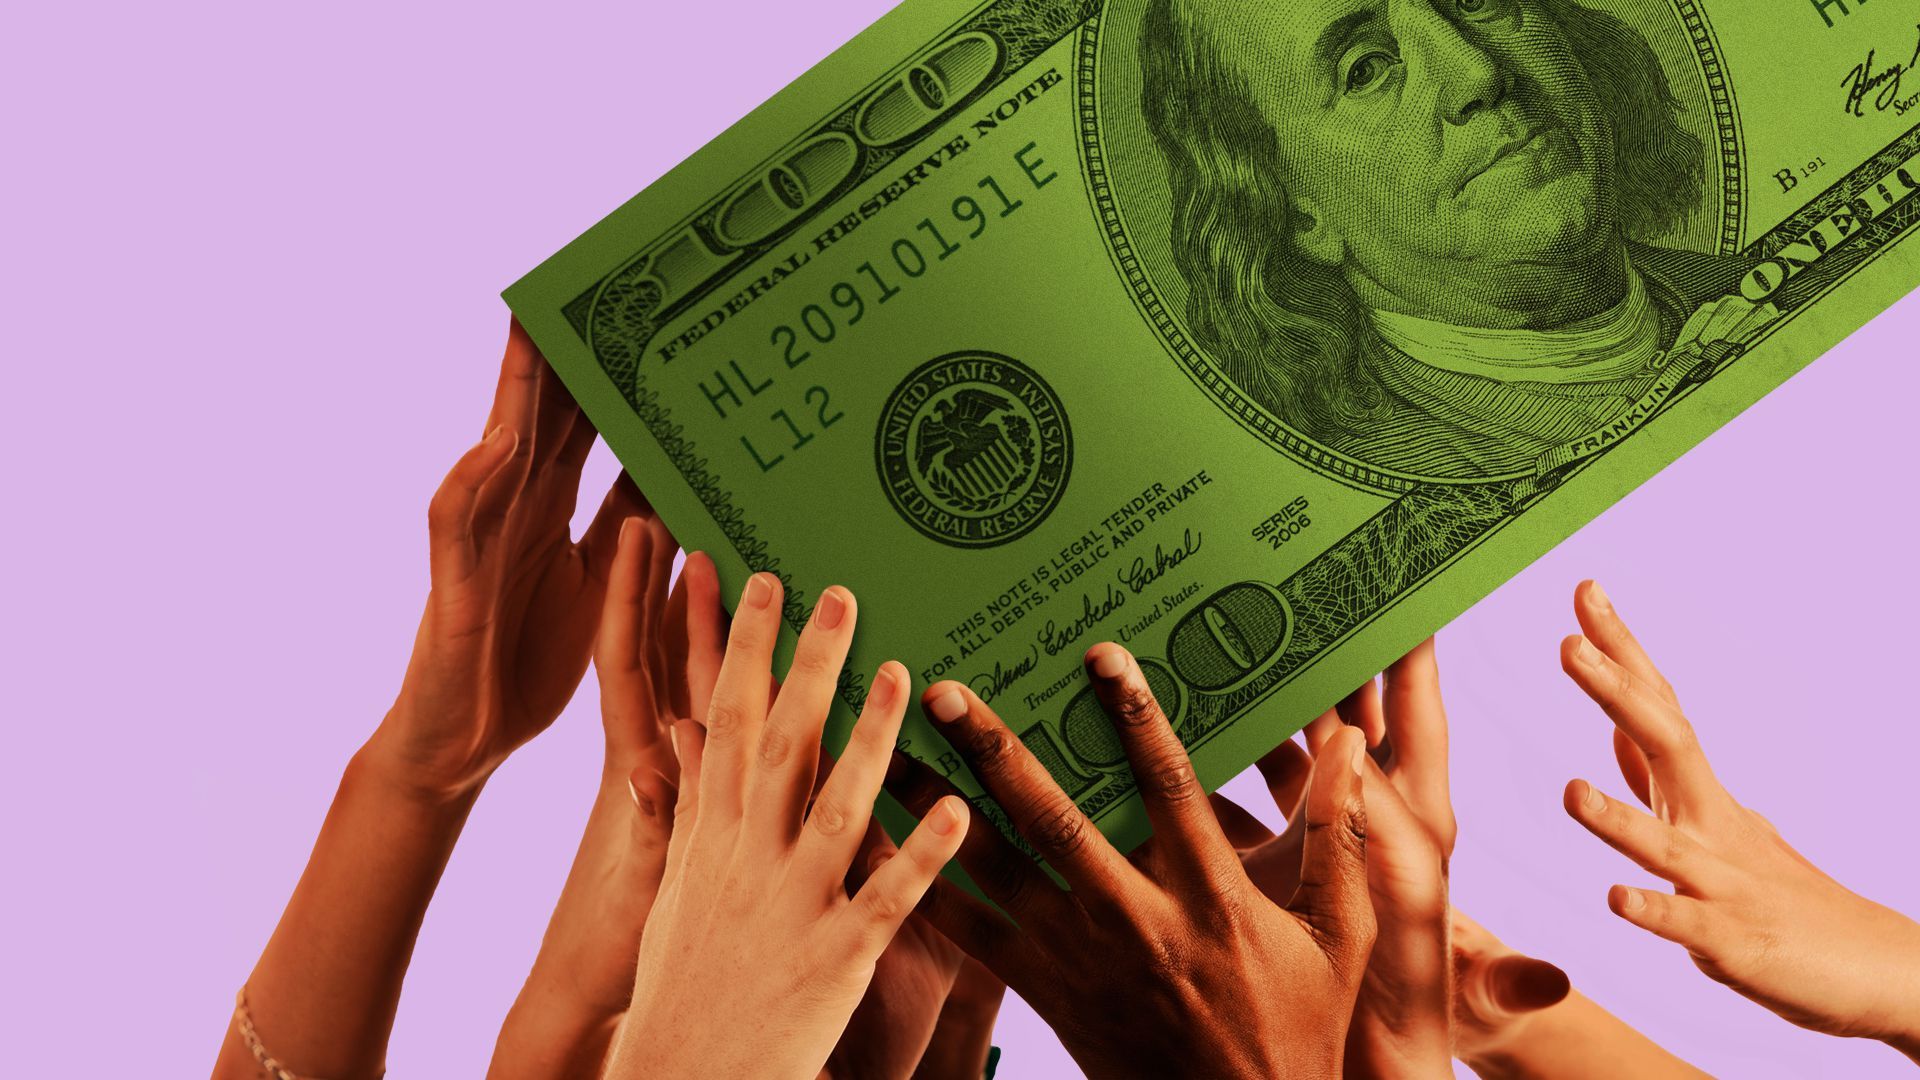 Illustration of hands reaching for a giant dollar